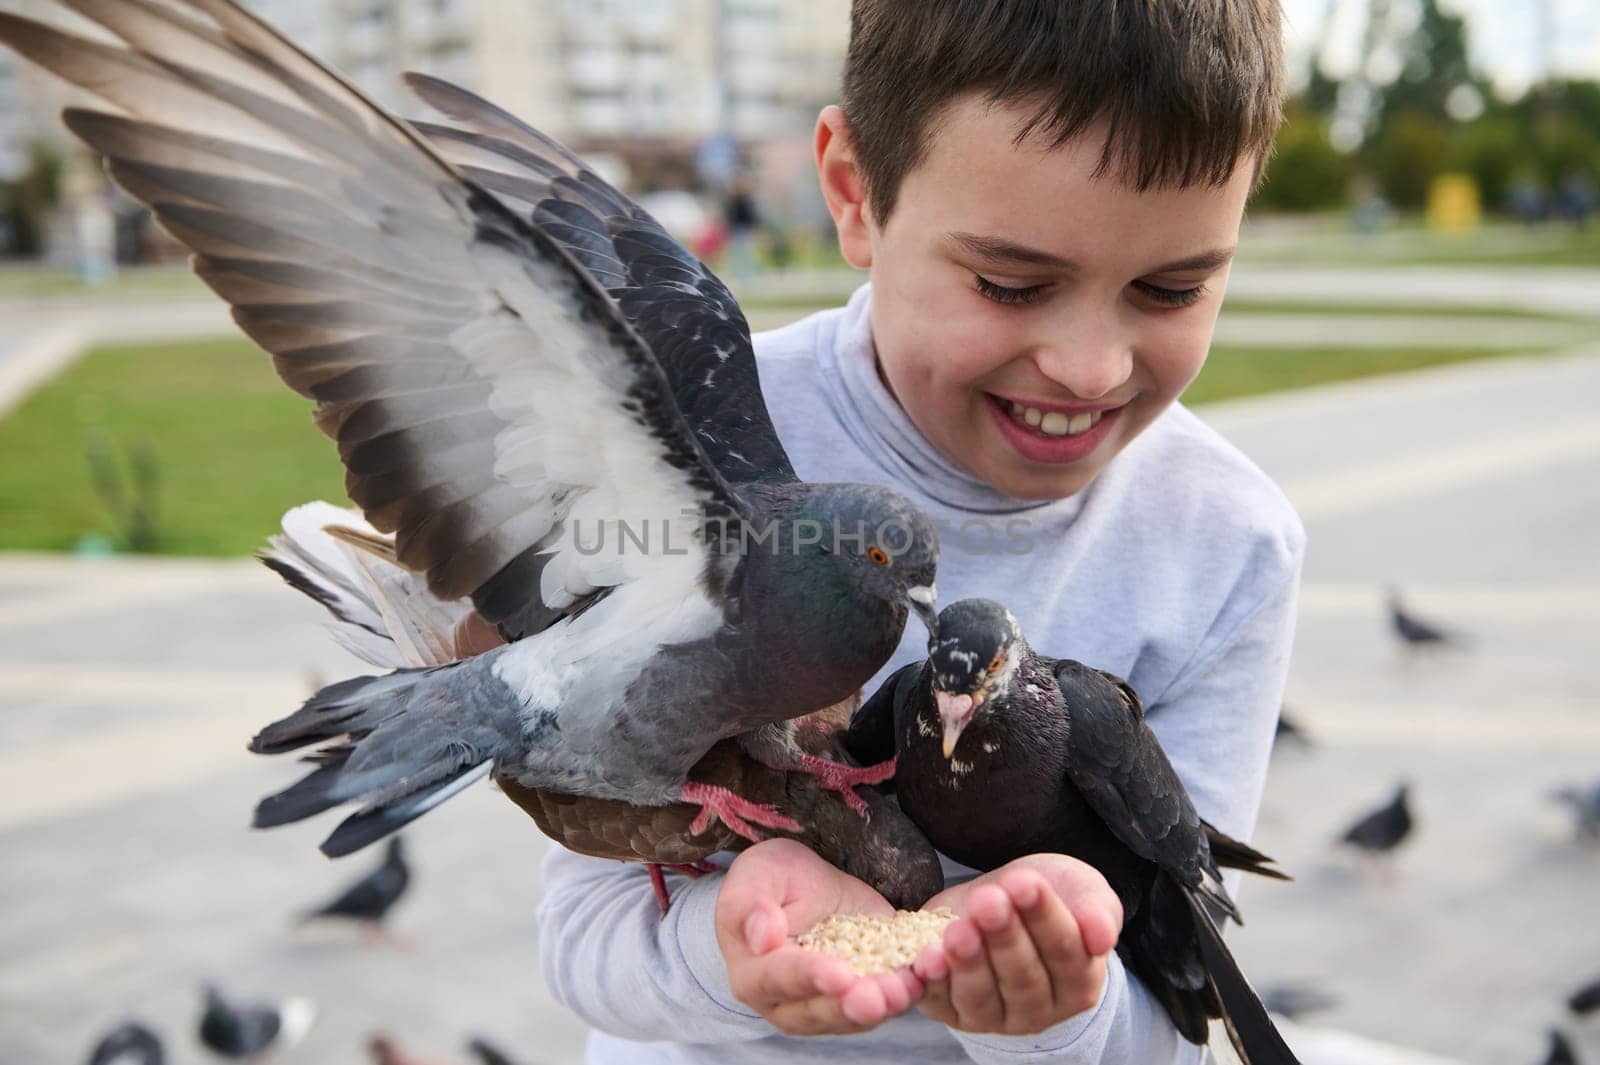 Smiling handsome adorable pre teen boy having fun during family outing, feeding birds from his hands in park square by artgf